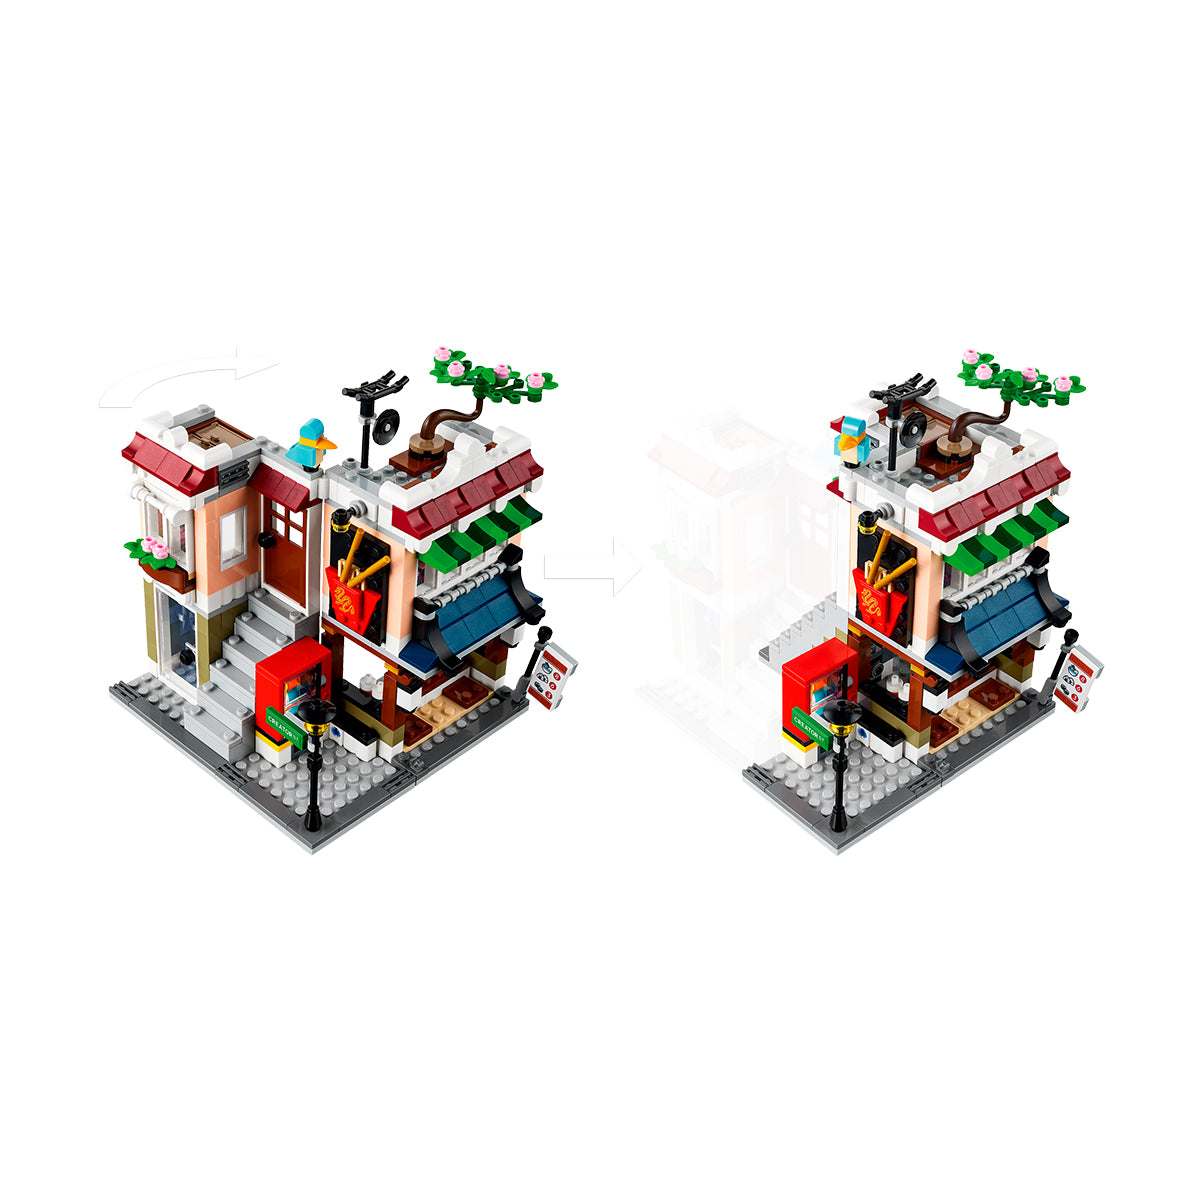 LEGO Creator 3 In 1 - Downtown Noodle Shop 31131